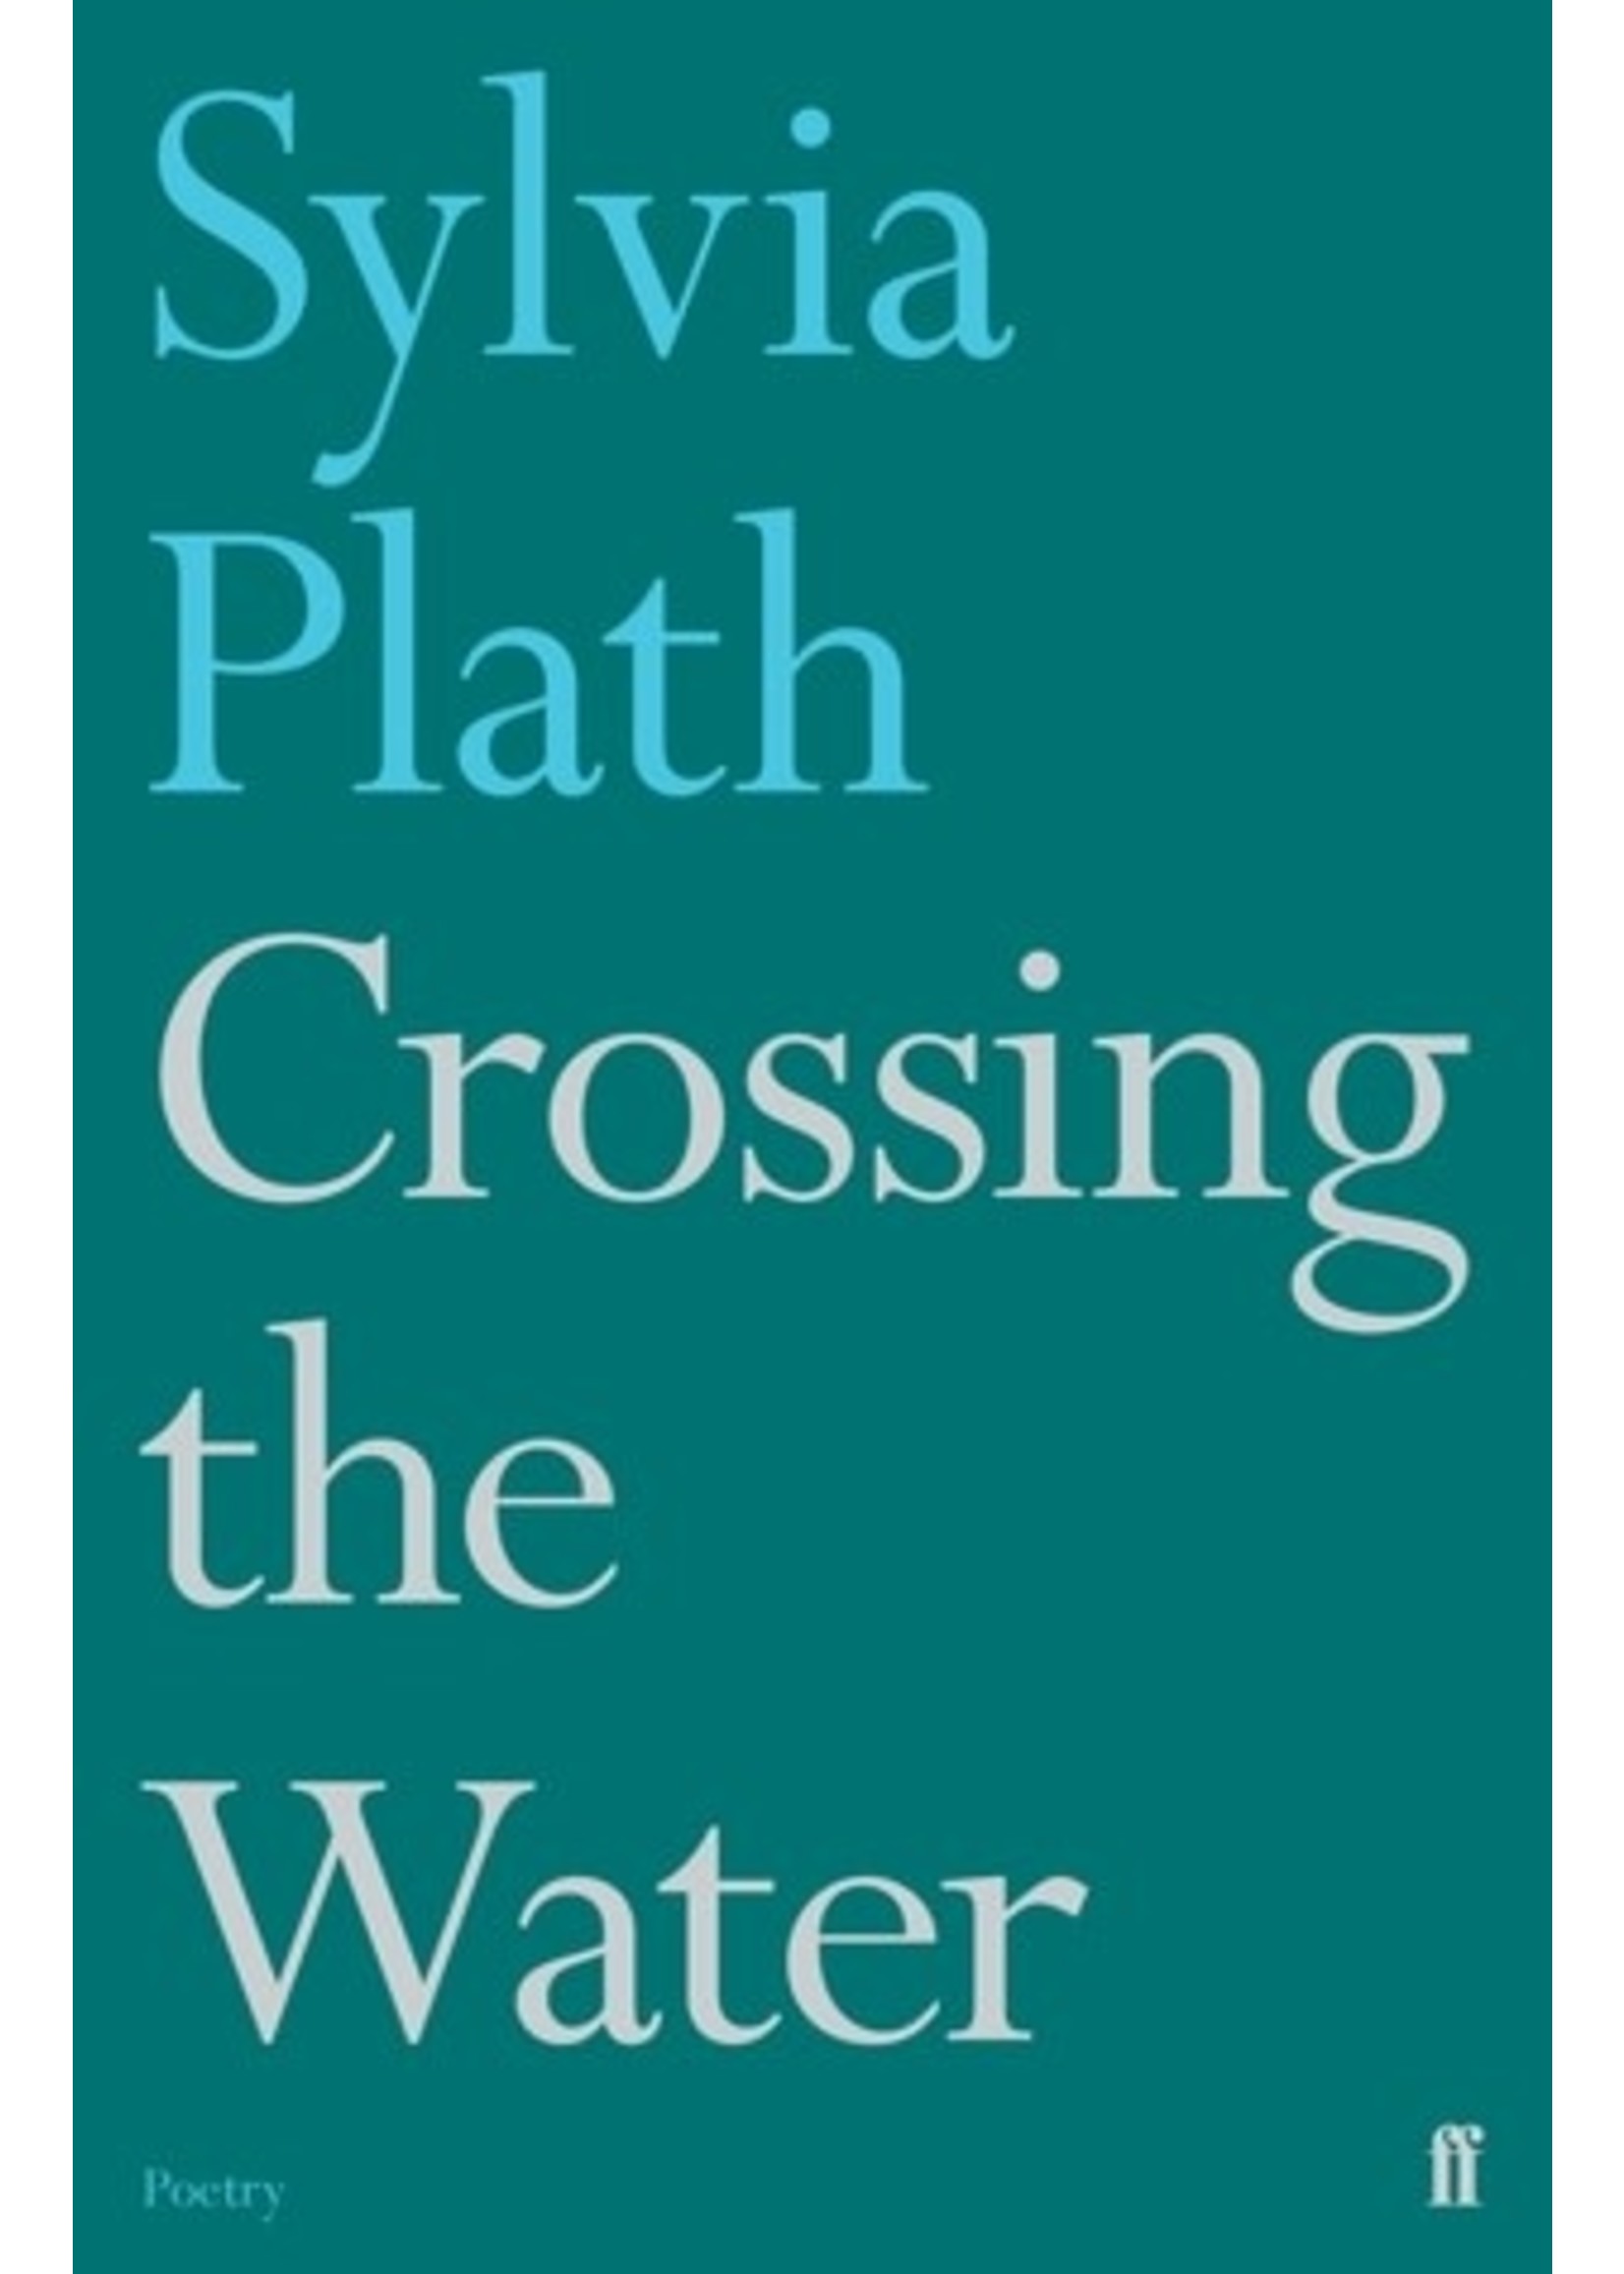 Crossing the Water by Sylvia Plath